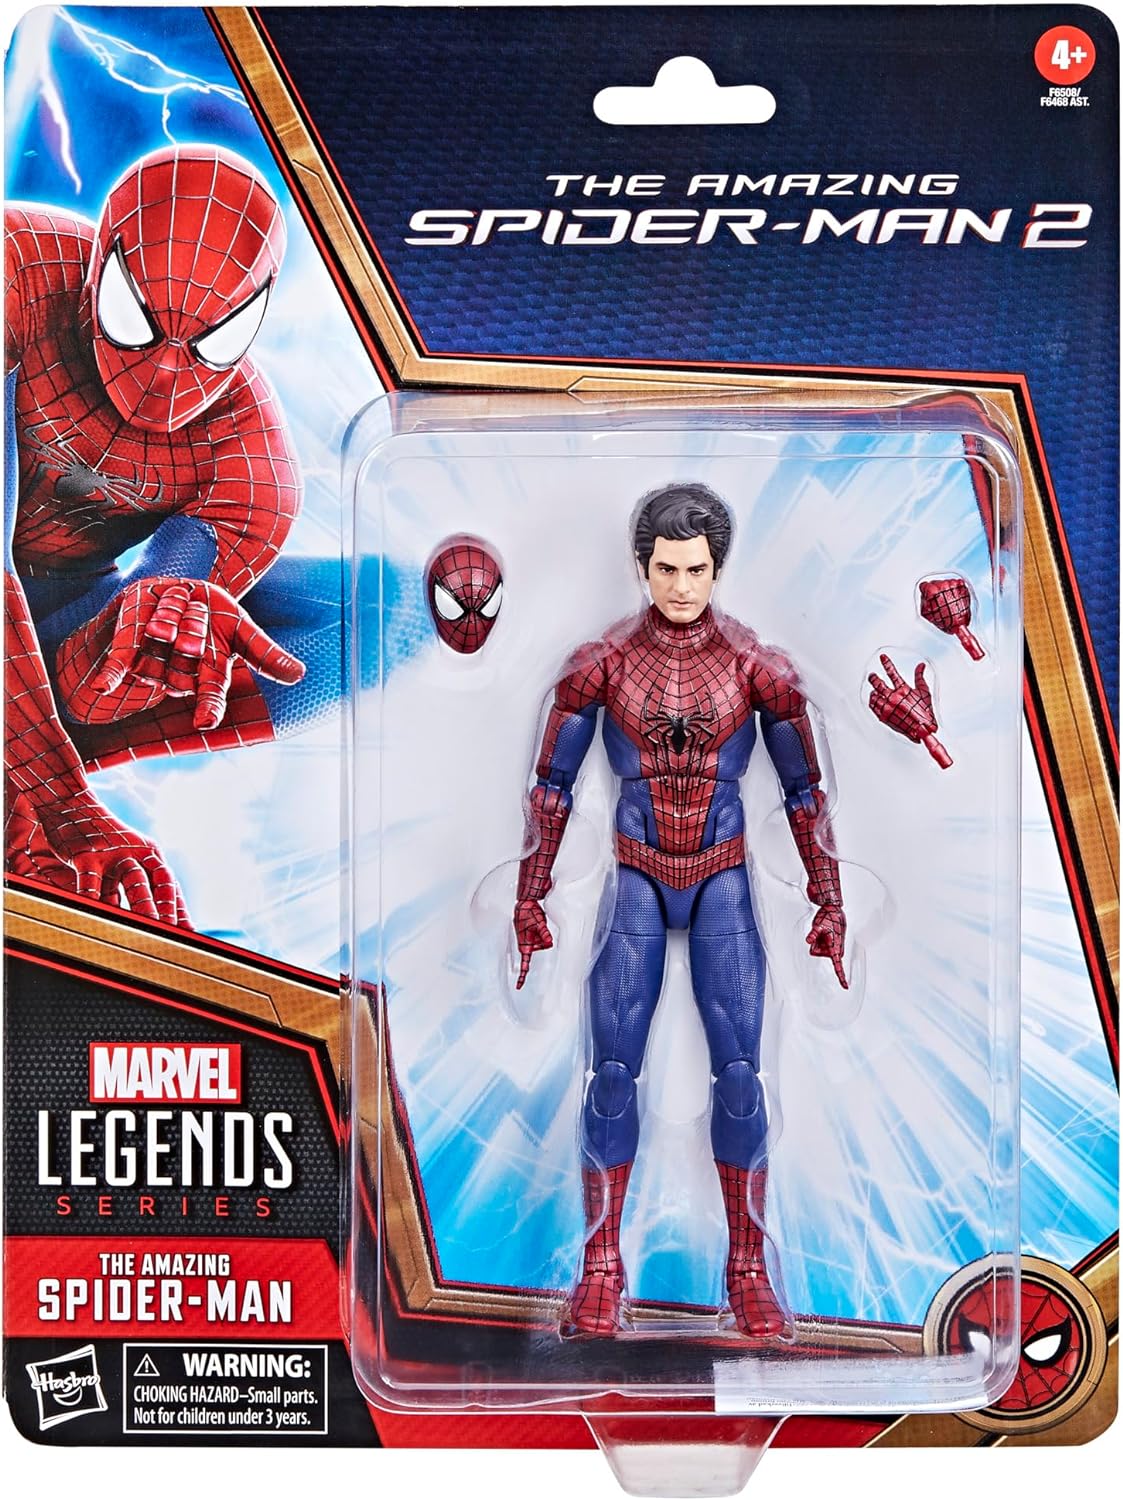 Marvel Legends the Amazing Spider-Man 2 The Amazing Spider-Man 6-Inch Action Figure画像